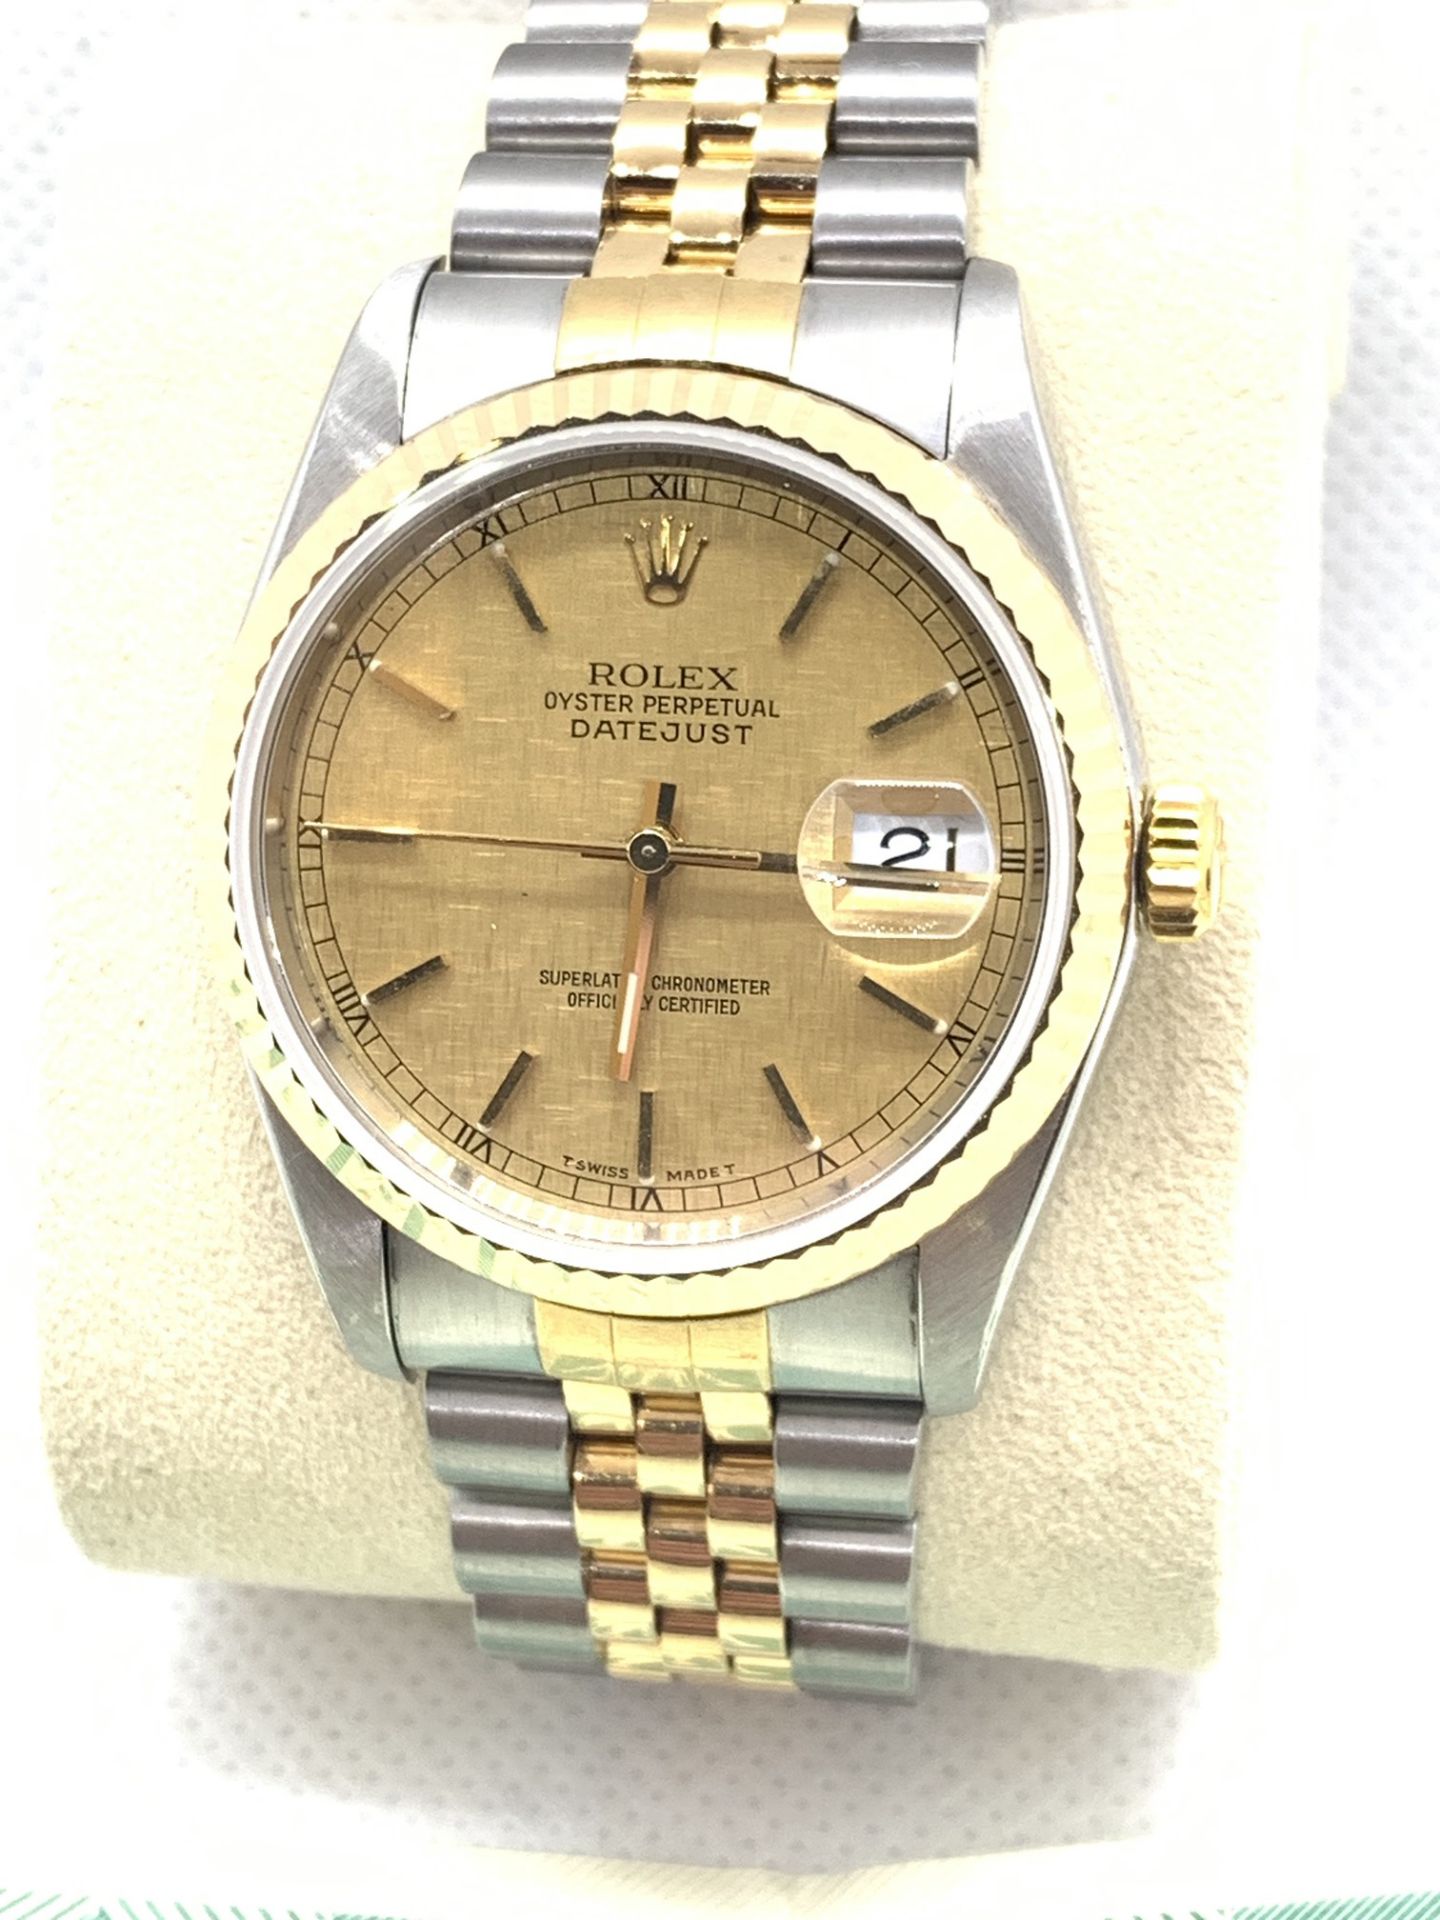 ROLEX S/S & GOLD GENTS WATCH WITH ROLEX CERTIFICATE - Image 5 of 6